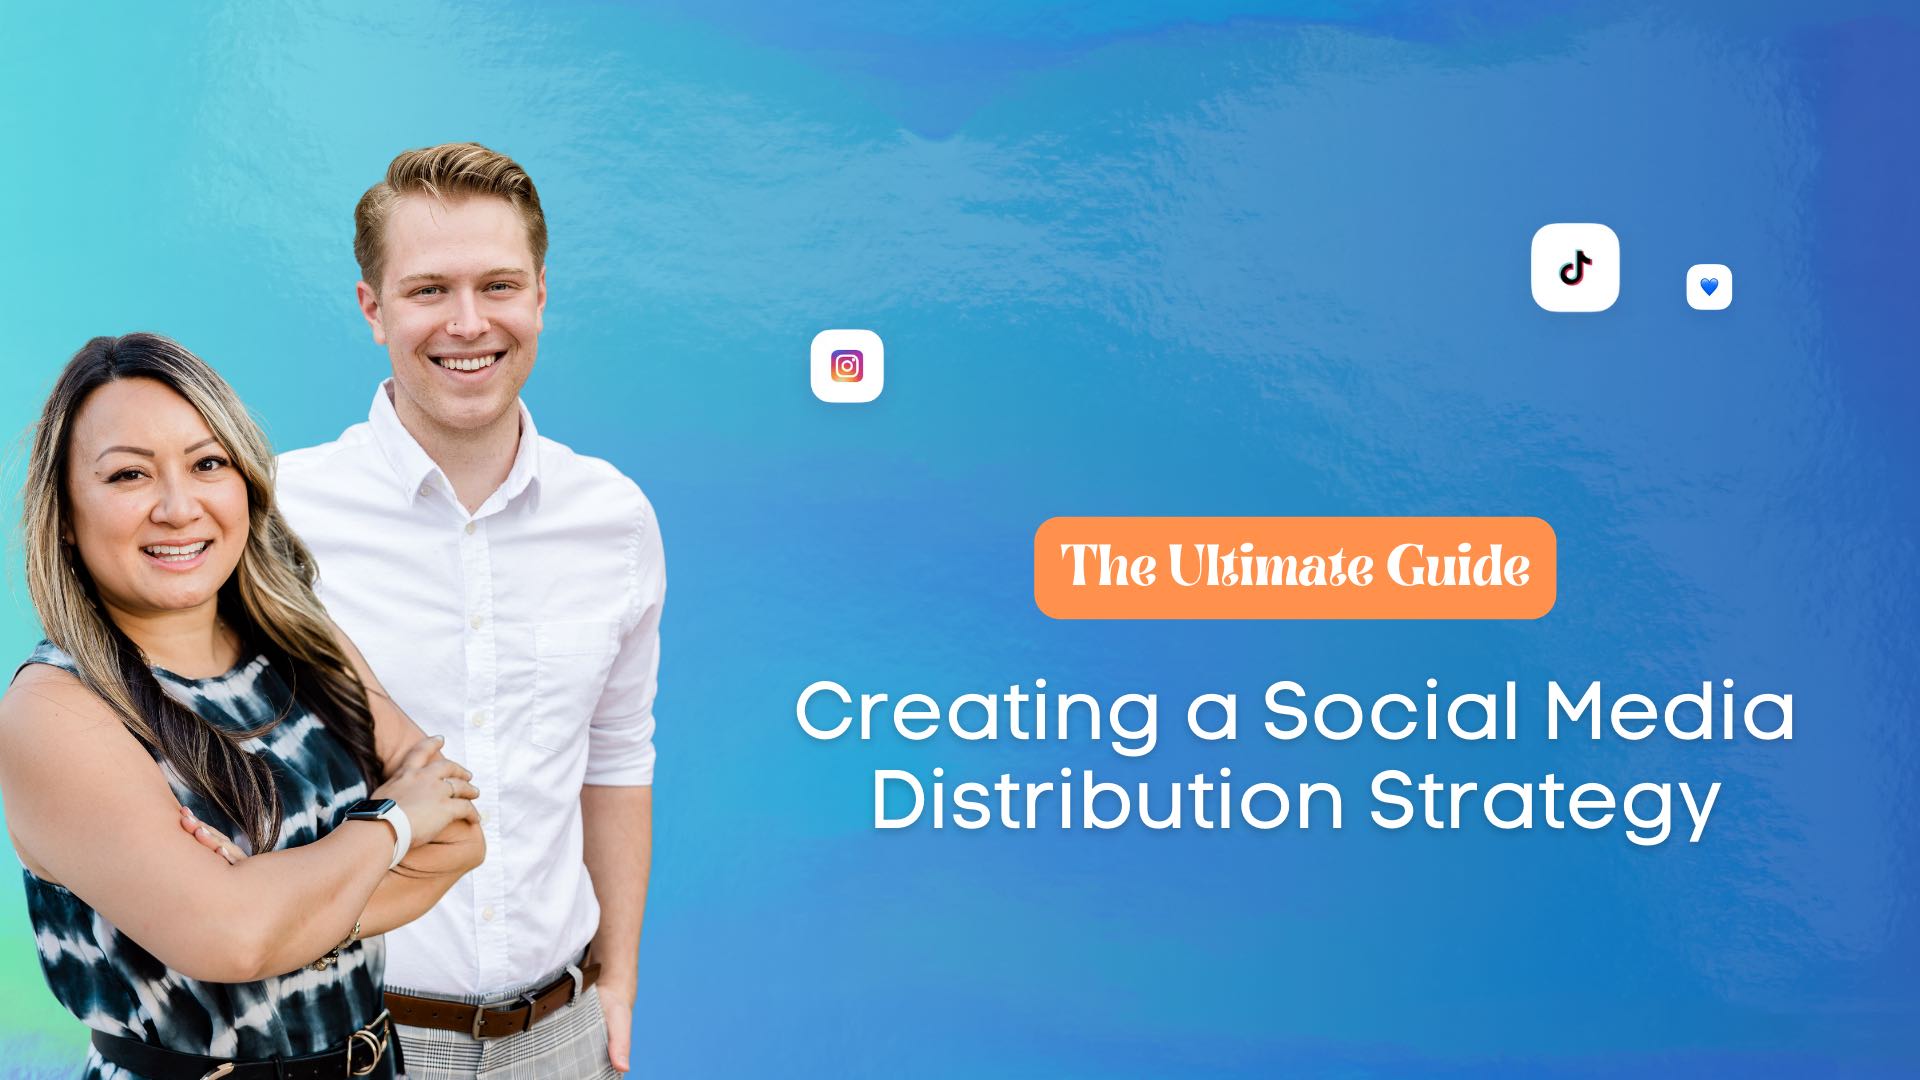 The Ultimate Guide to Creating a Social Media Distribution Strategy